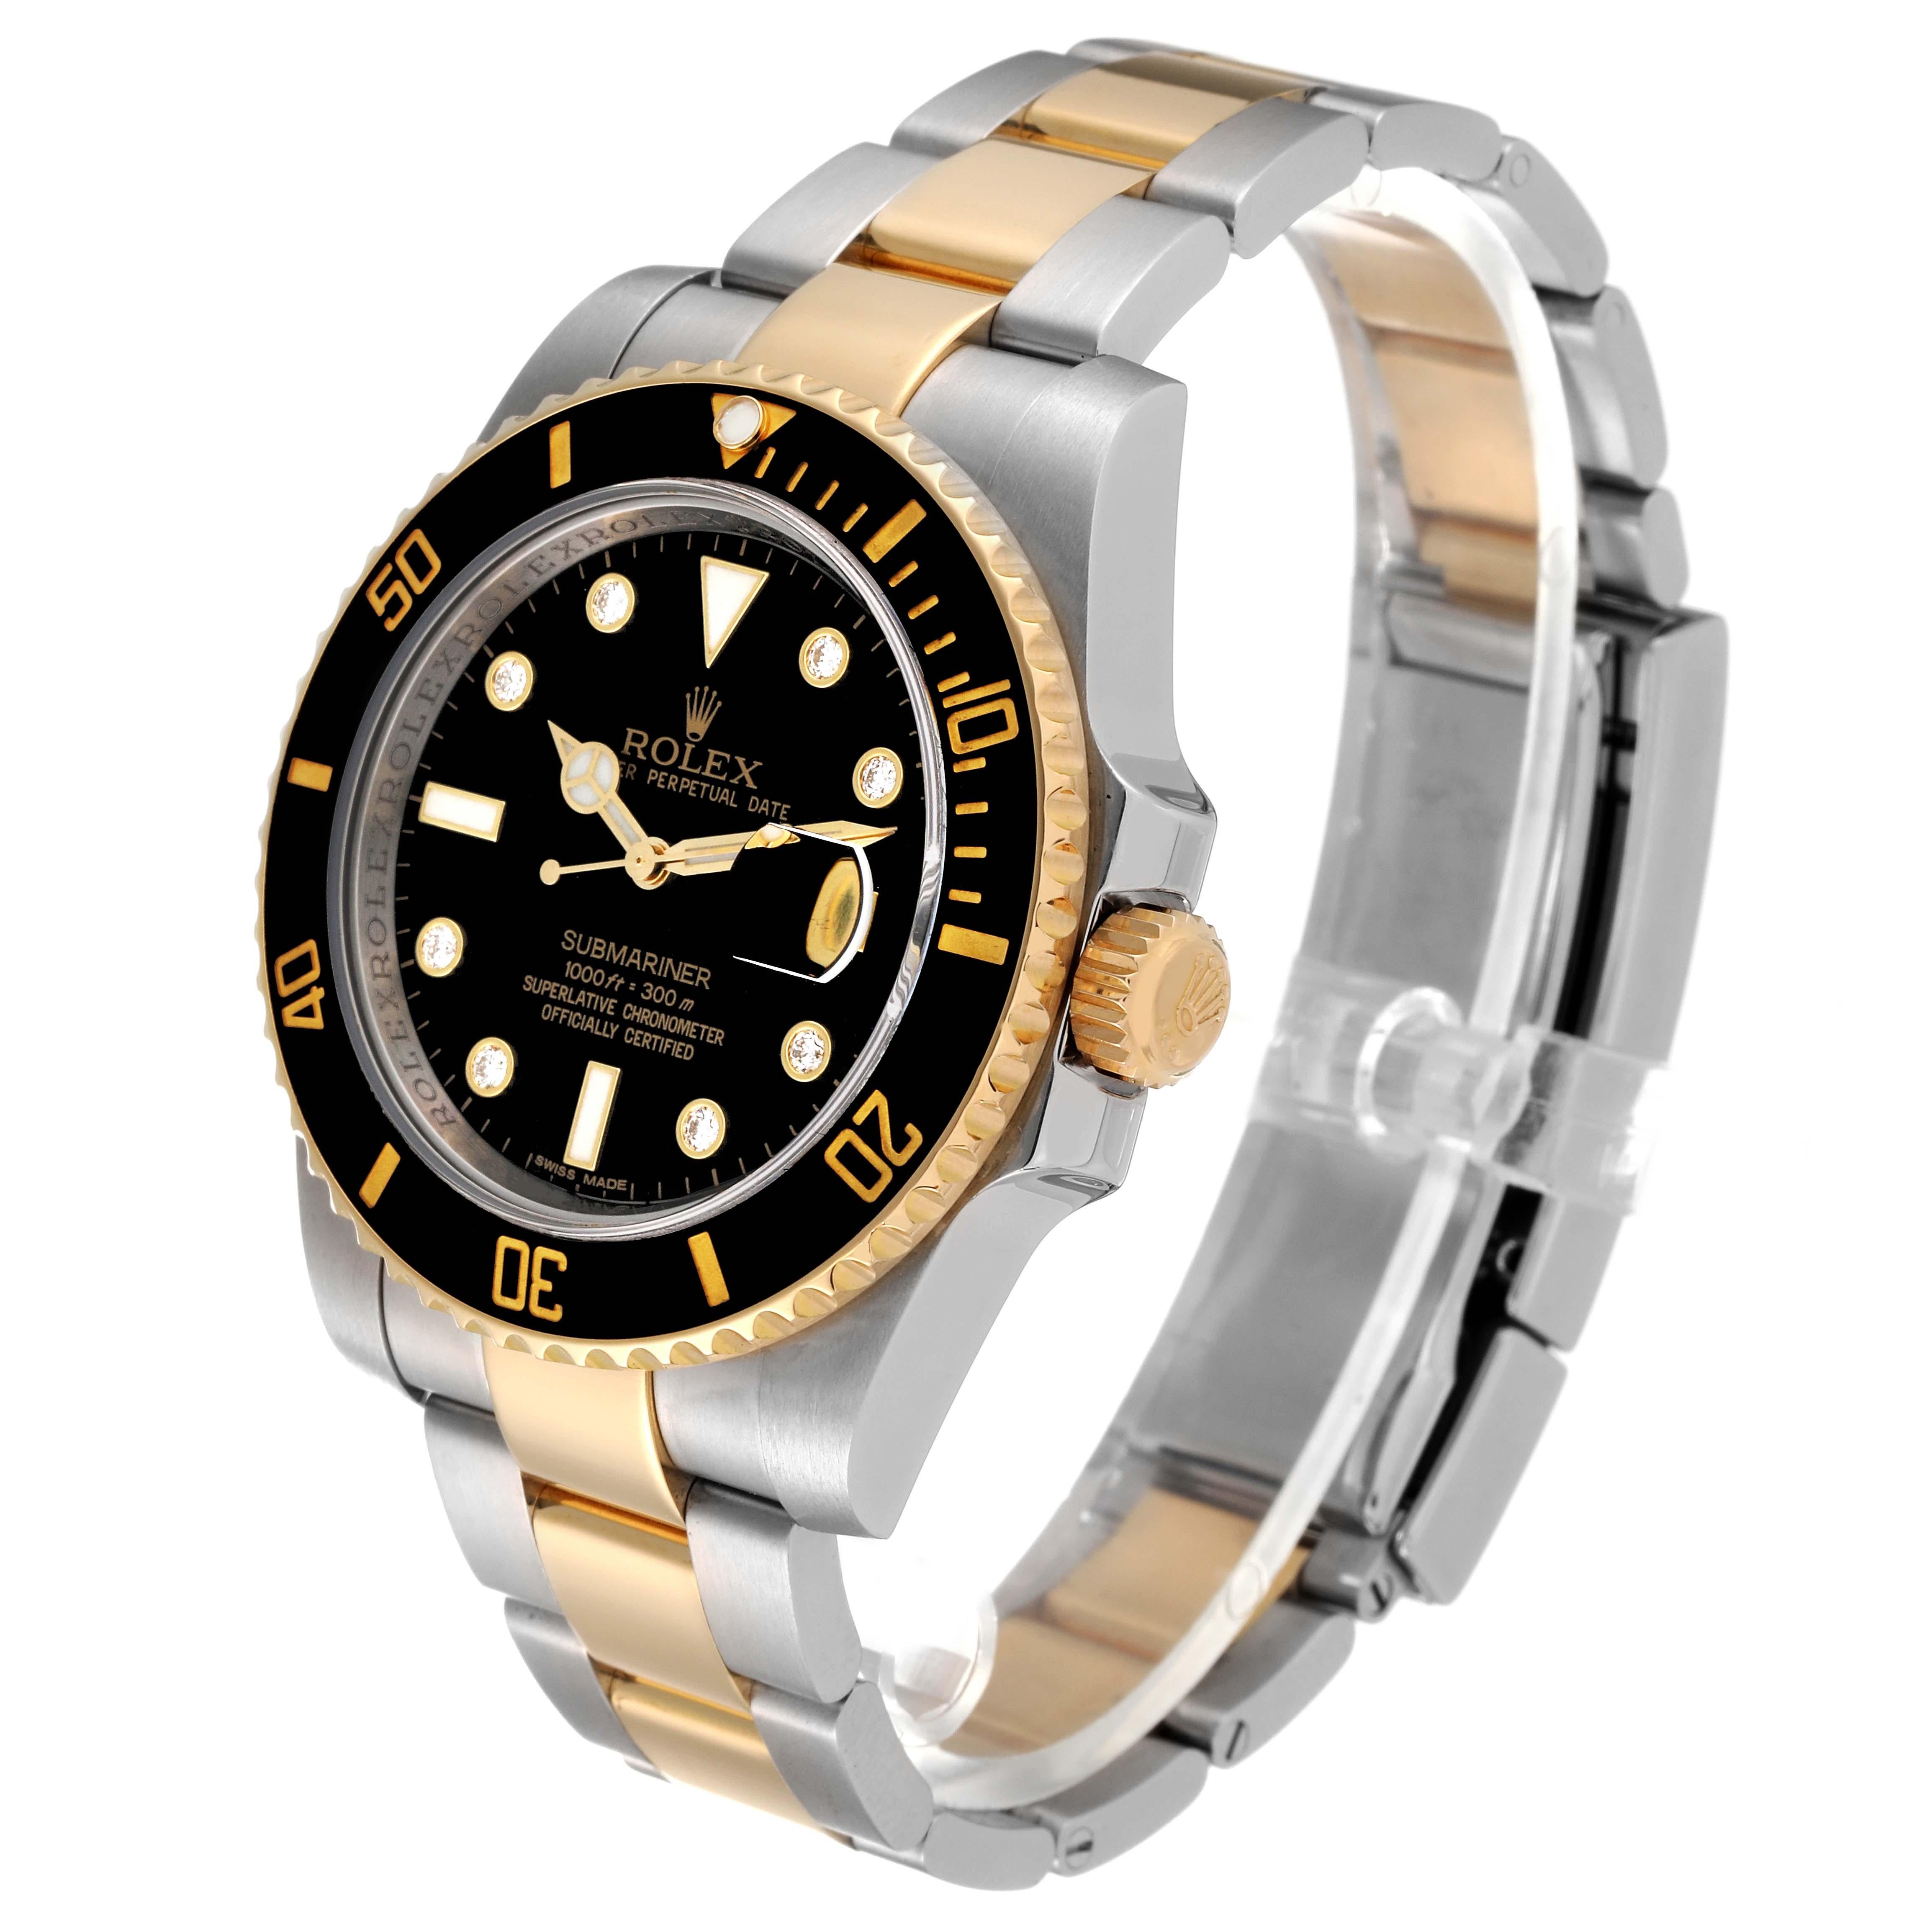 Rolex Submariner Steel Yellow Gold Black Diamond Dial Mens Watch 116613 Box Card For Sale 5